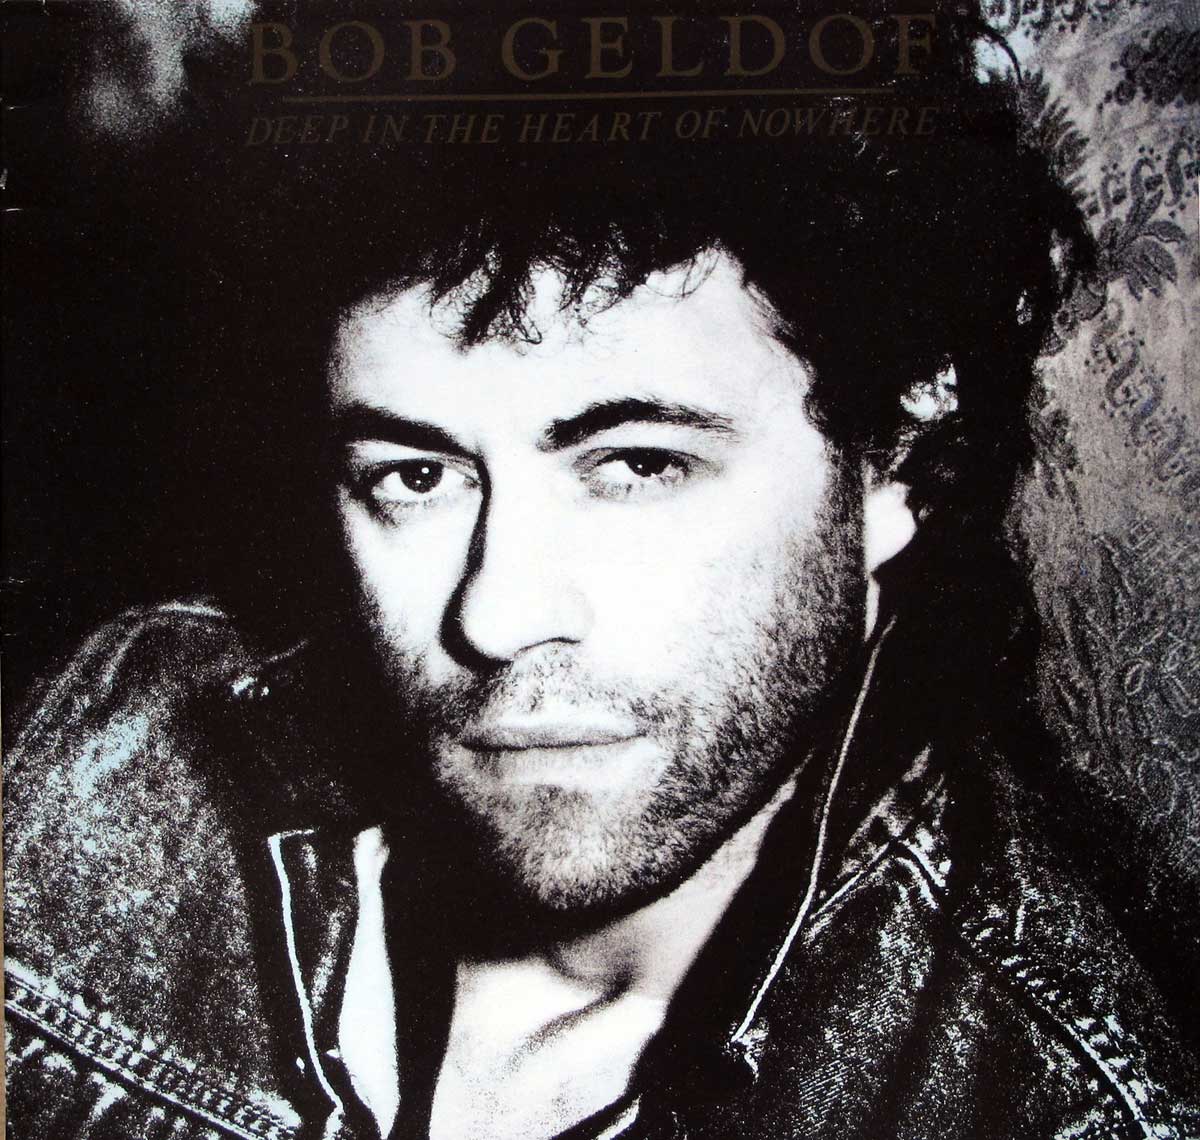 High Quality Photo of Album Front Cover  "Bob Geldof Deep In The Heart of Nowhere"